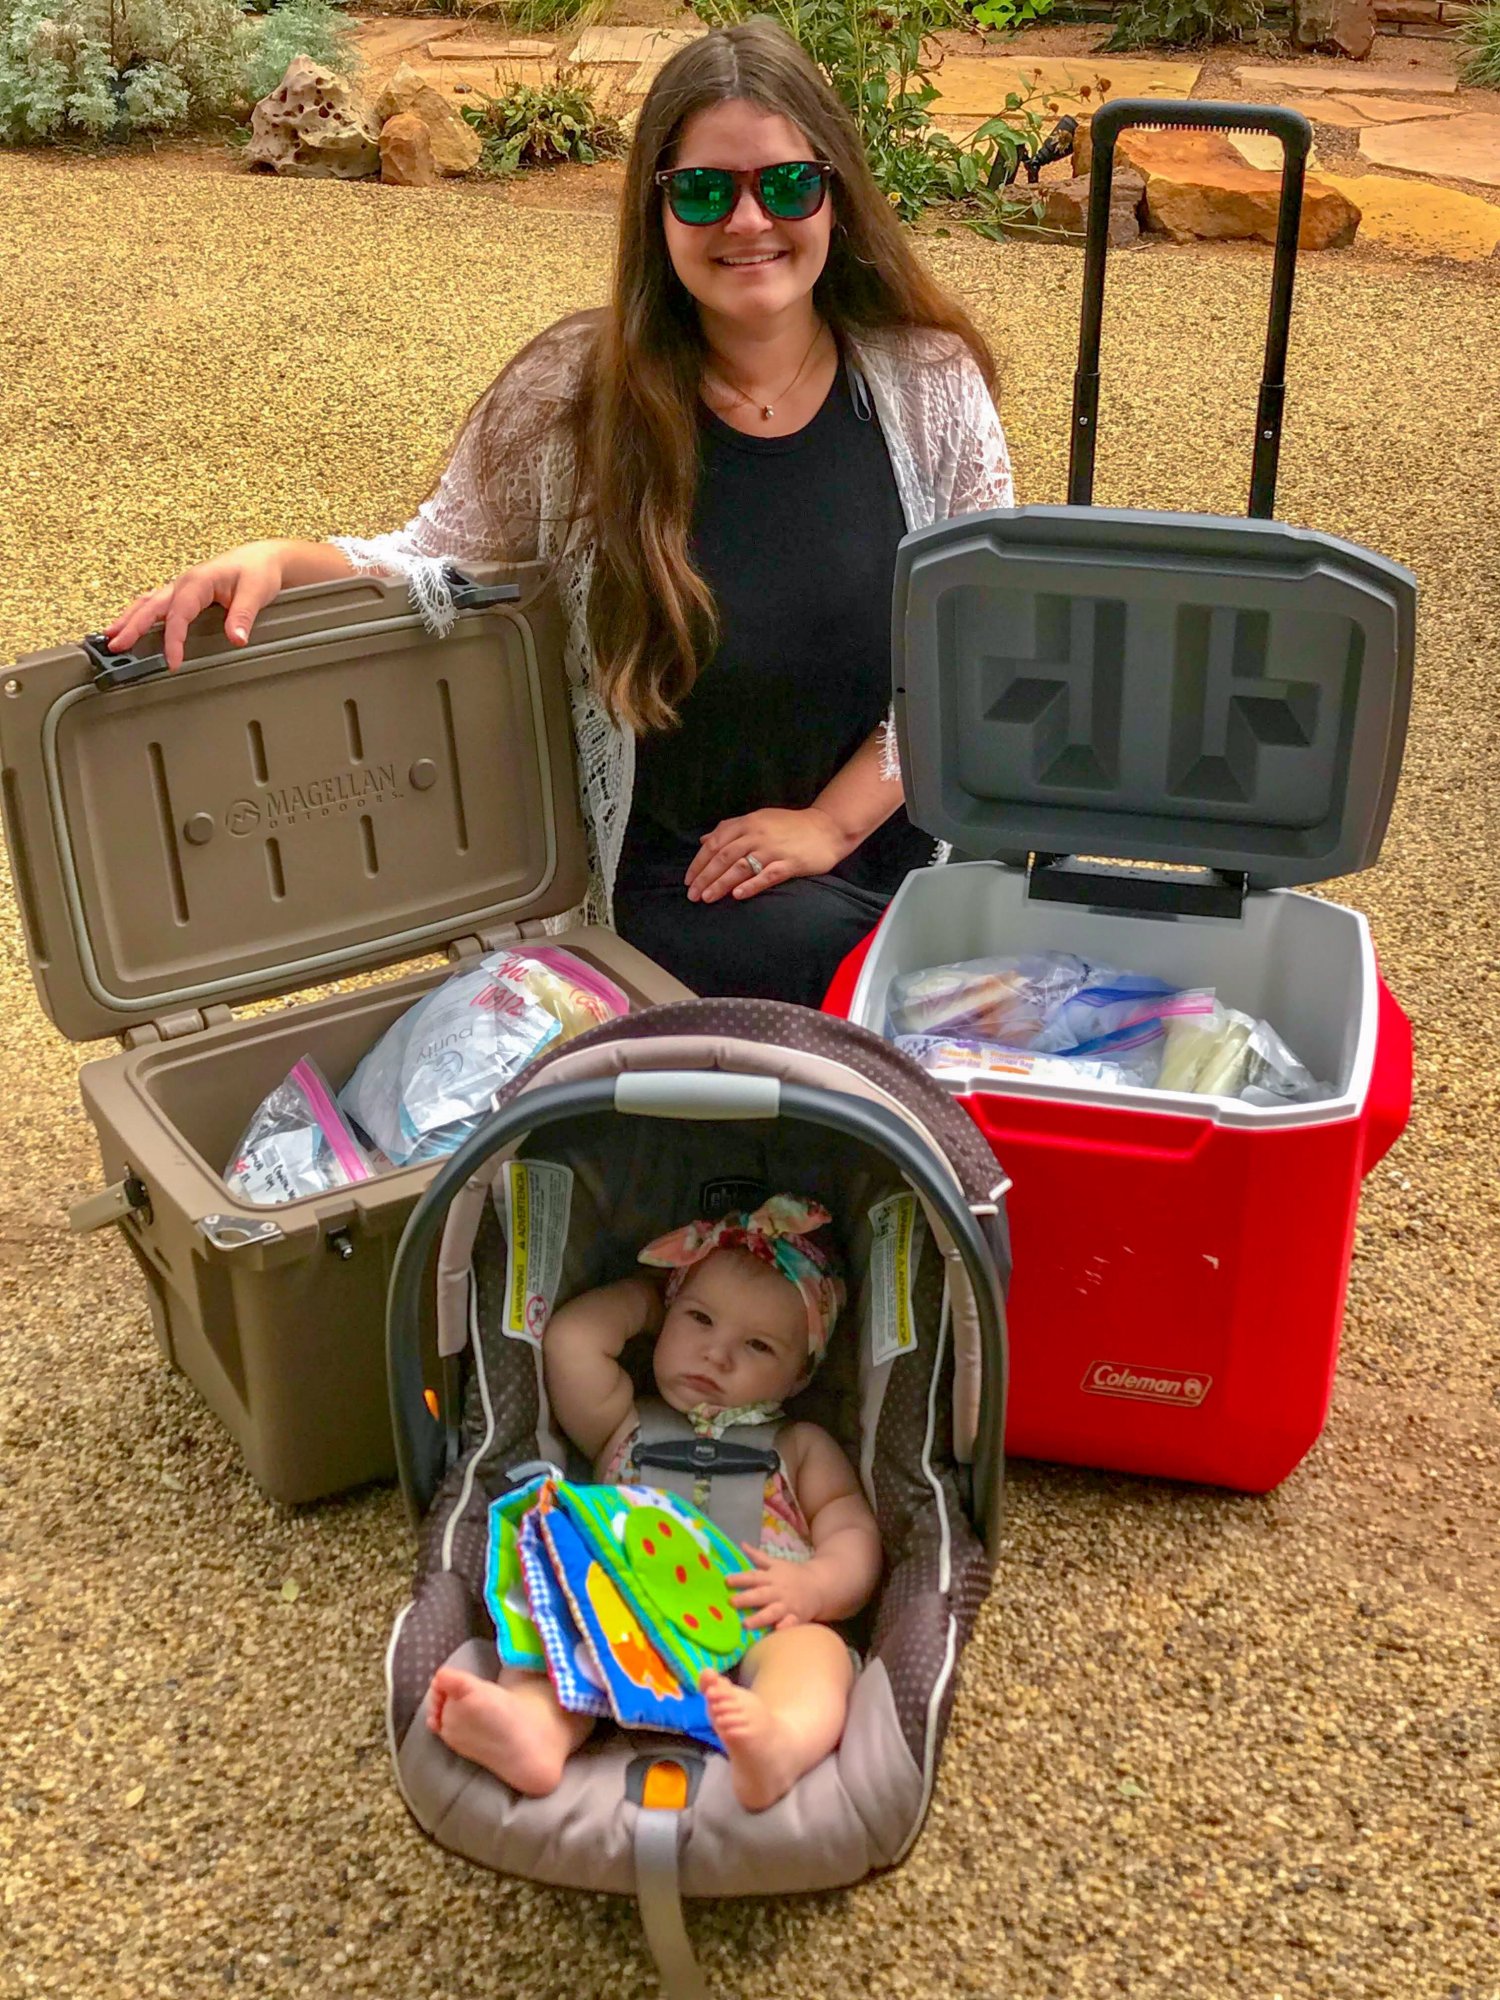 Mother and baby posed next to two coolers of breastmilk